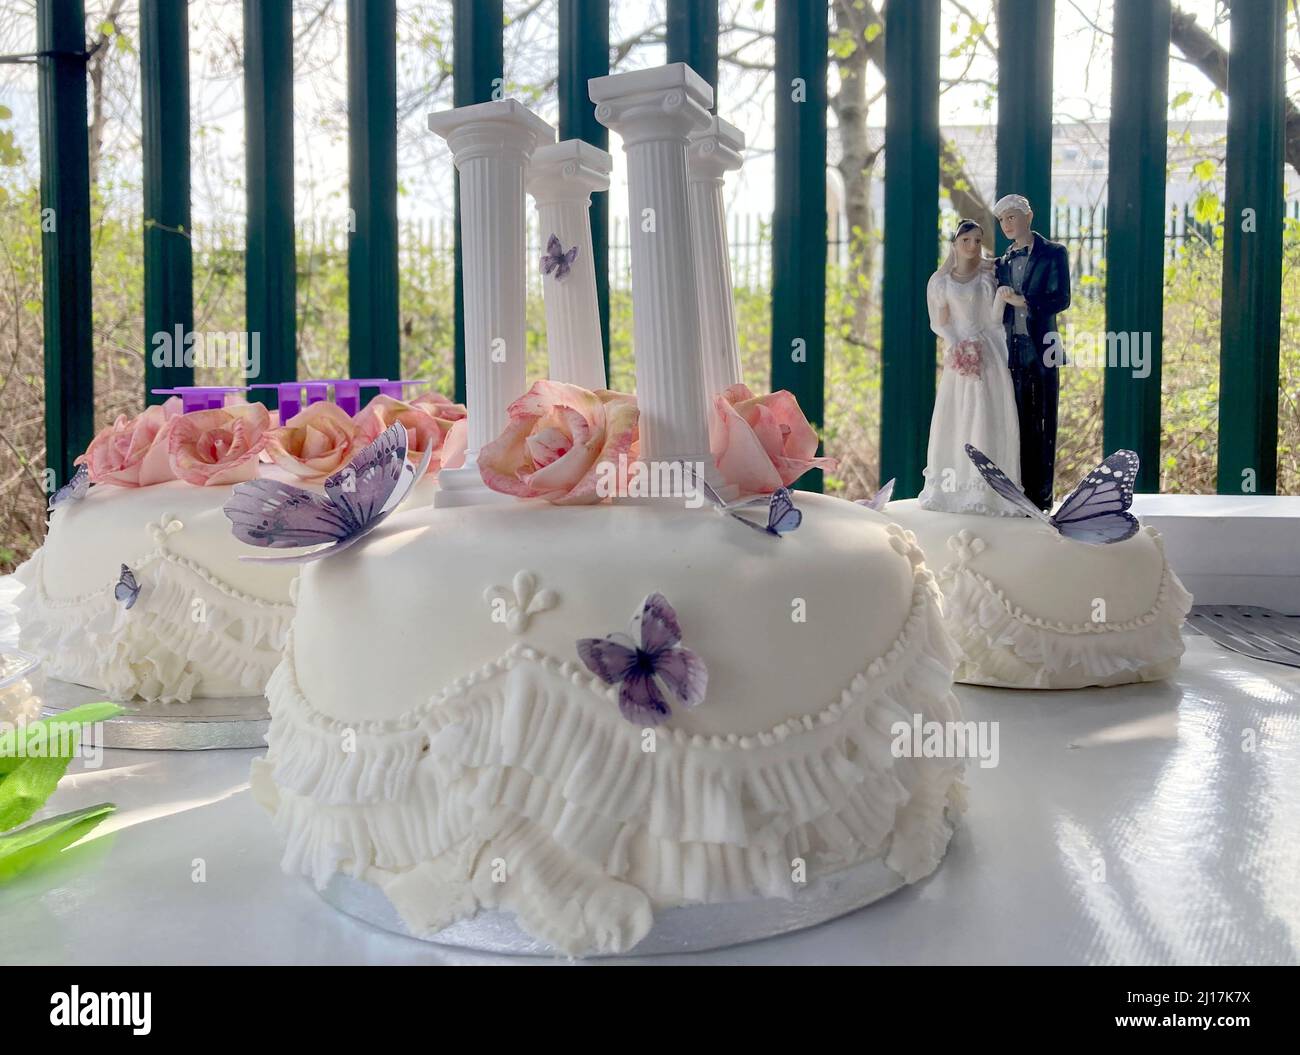 London, UK. 23rd Mar, 2022. A wedding cake for the bride and groom stands on a table outside the prison. Wikileaks founder Assange and his fiancée Moris plan to say 'I do' this Wednesday afternoon at London's maximum security Belmarsh prison. Assange, who is fighting extradition to the U.S. that would see him face up to 175 years in prison, will marry Morris in a ceremony with four guests and two witnesses. Credit: Christoph Meyer/dpa/Alamy Live News Stock Photo